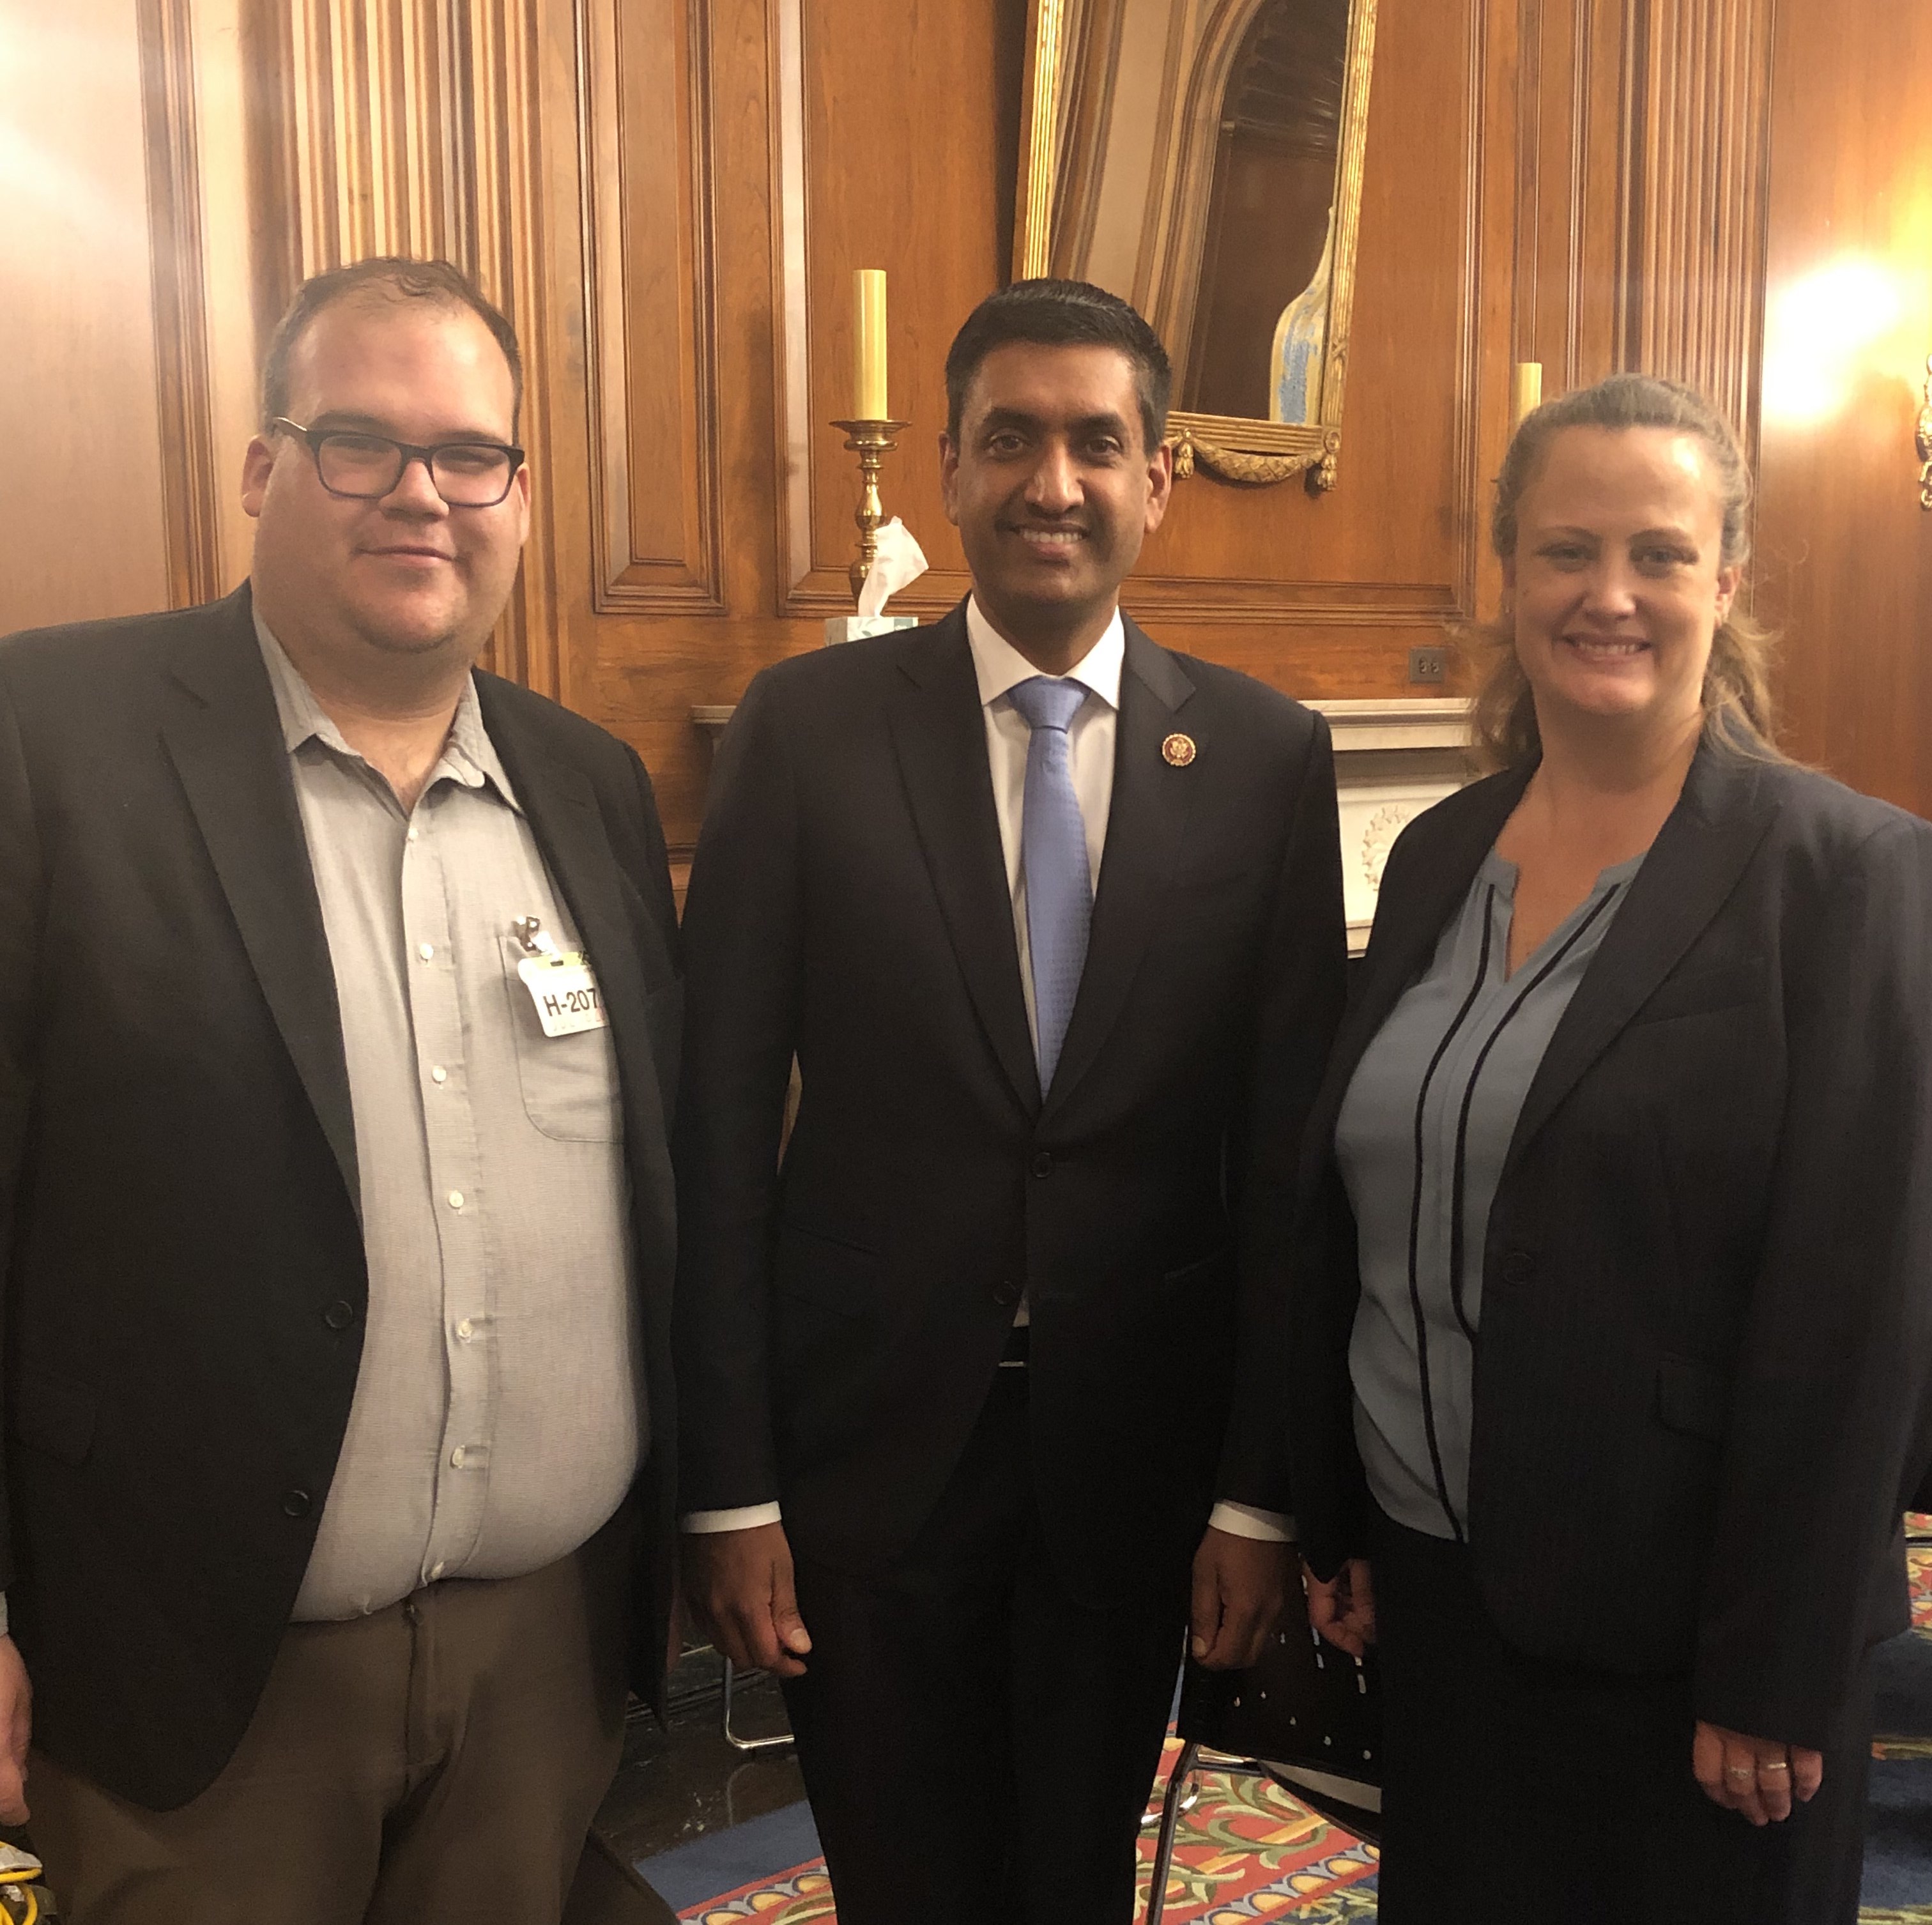 CMEP's Kyle Cristofalo and Rev. Dr. Mae Elise Cannon with Rep. Ro Khanna